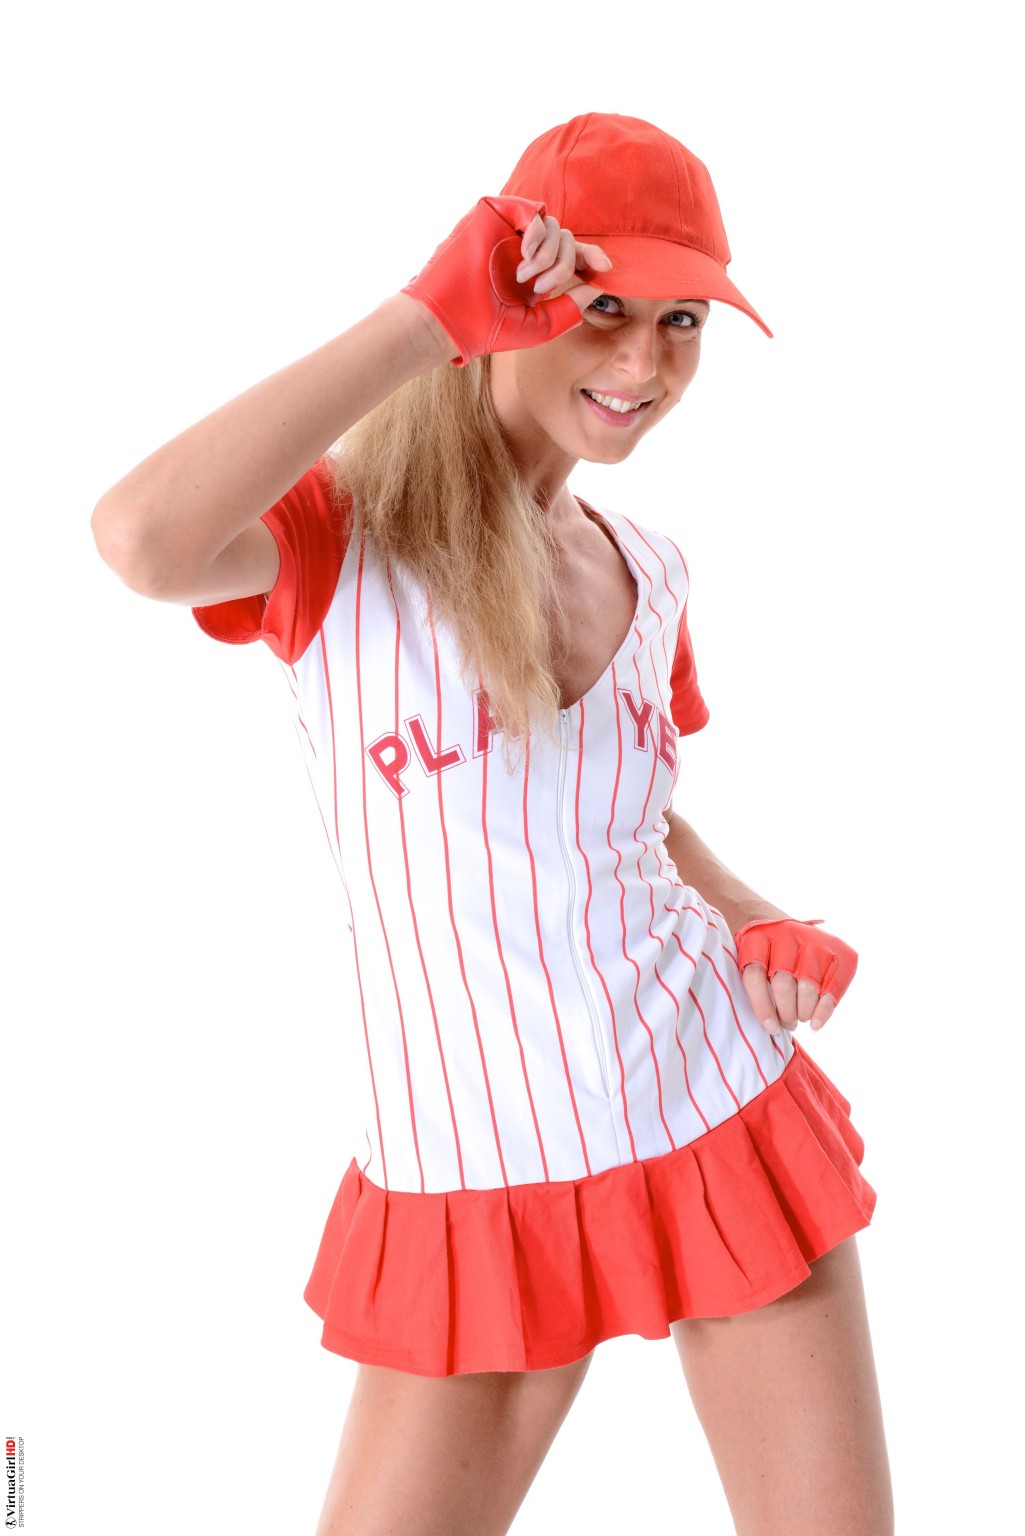 Blonde Babe trägt Baseball-Outfit
 #71204534